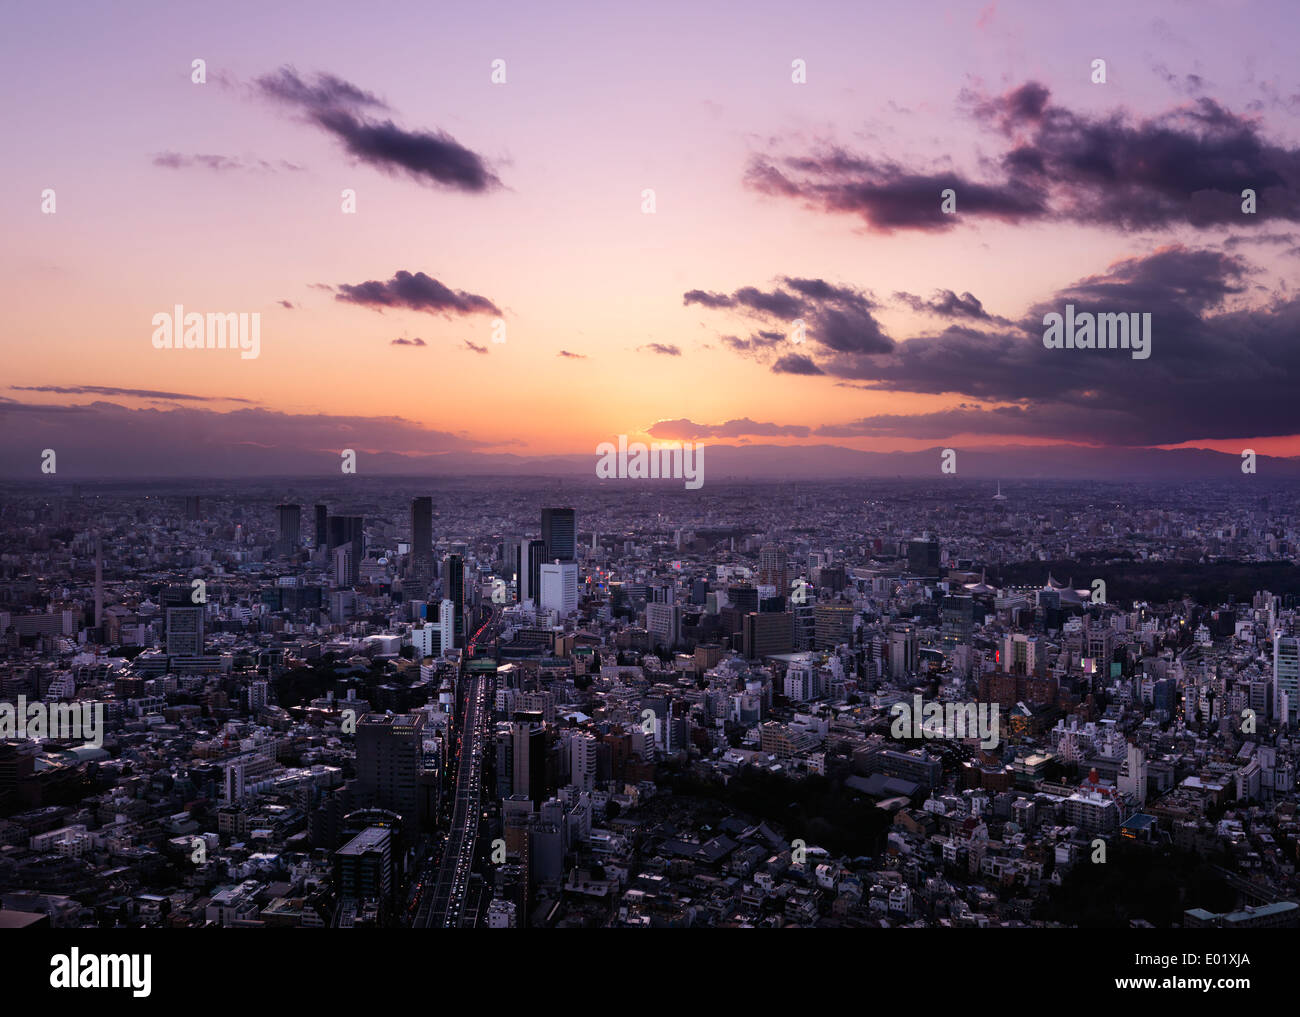 License available at MaximImages.com - Dramatic sunset scenery of Tokyo city landscape lit with red sunlight, aerial view. Shibuya, Tokyo, Japan. Stock Photo